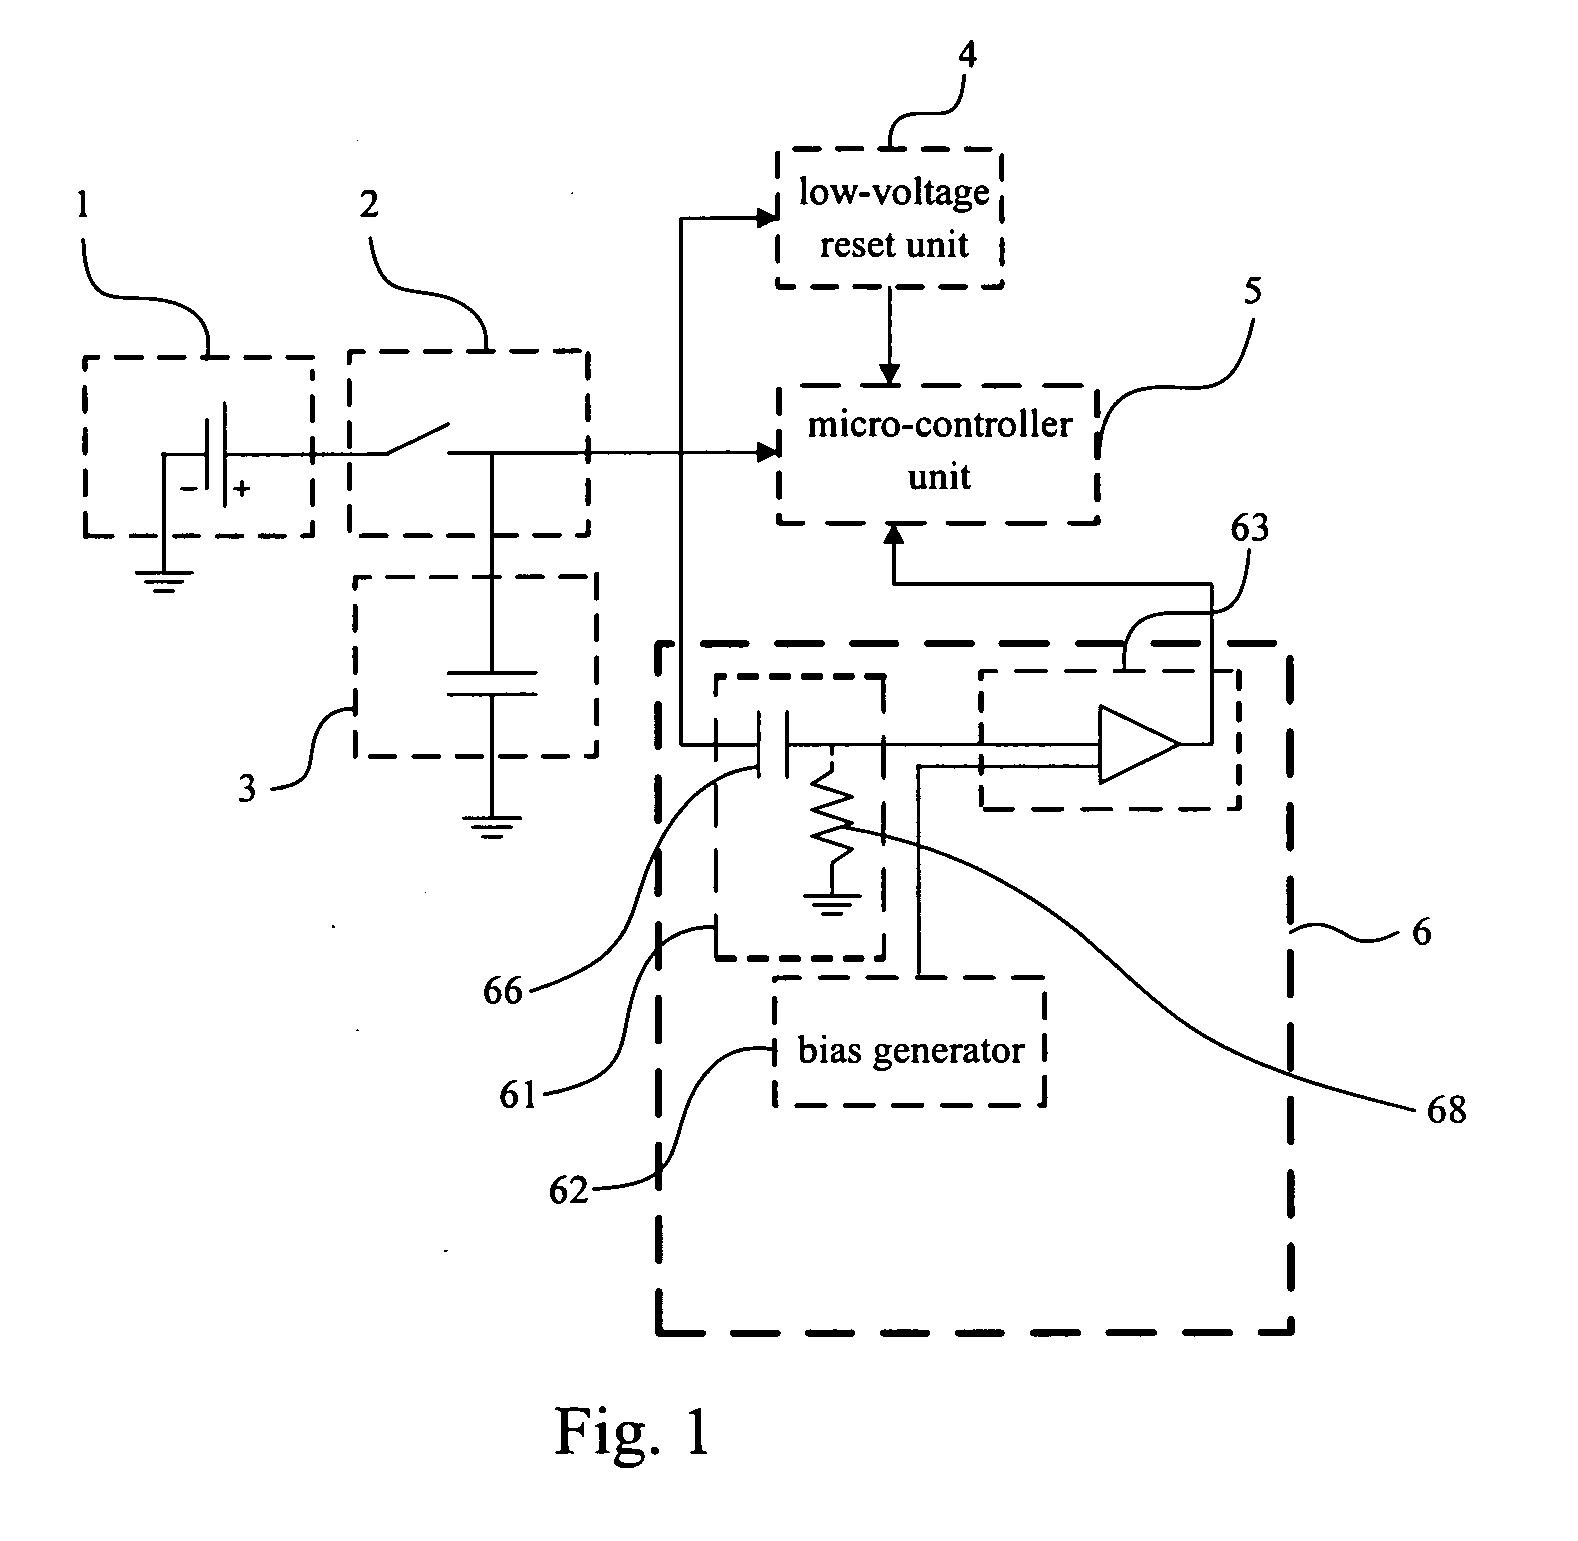 Apparatus for awaking an electronic device from a standby mode